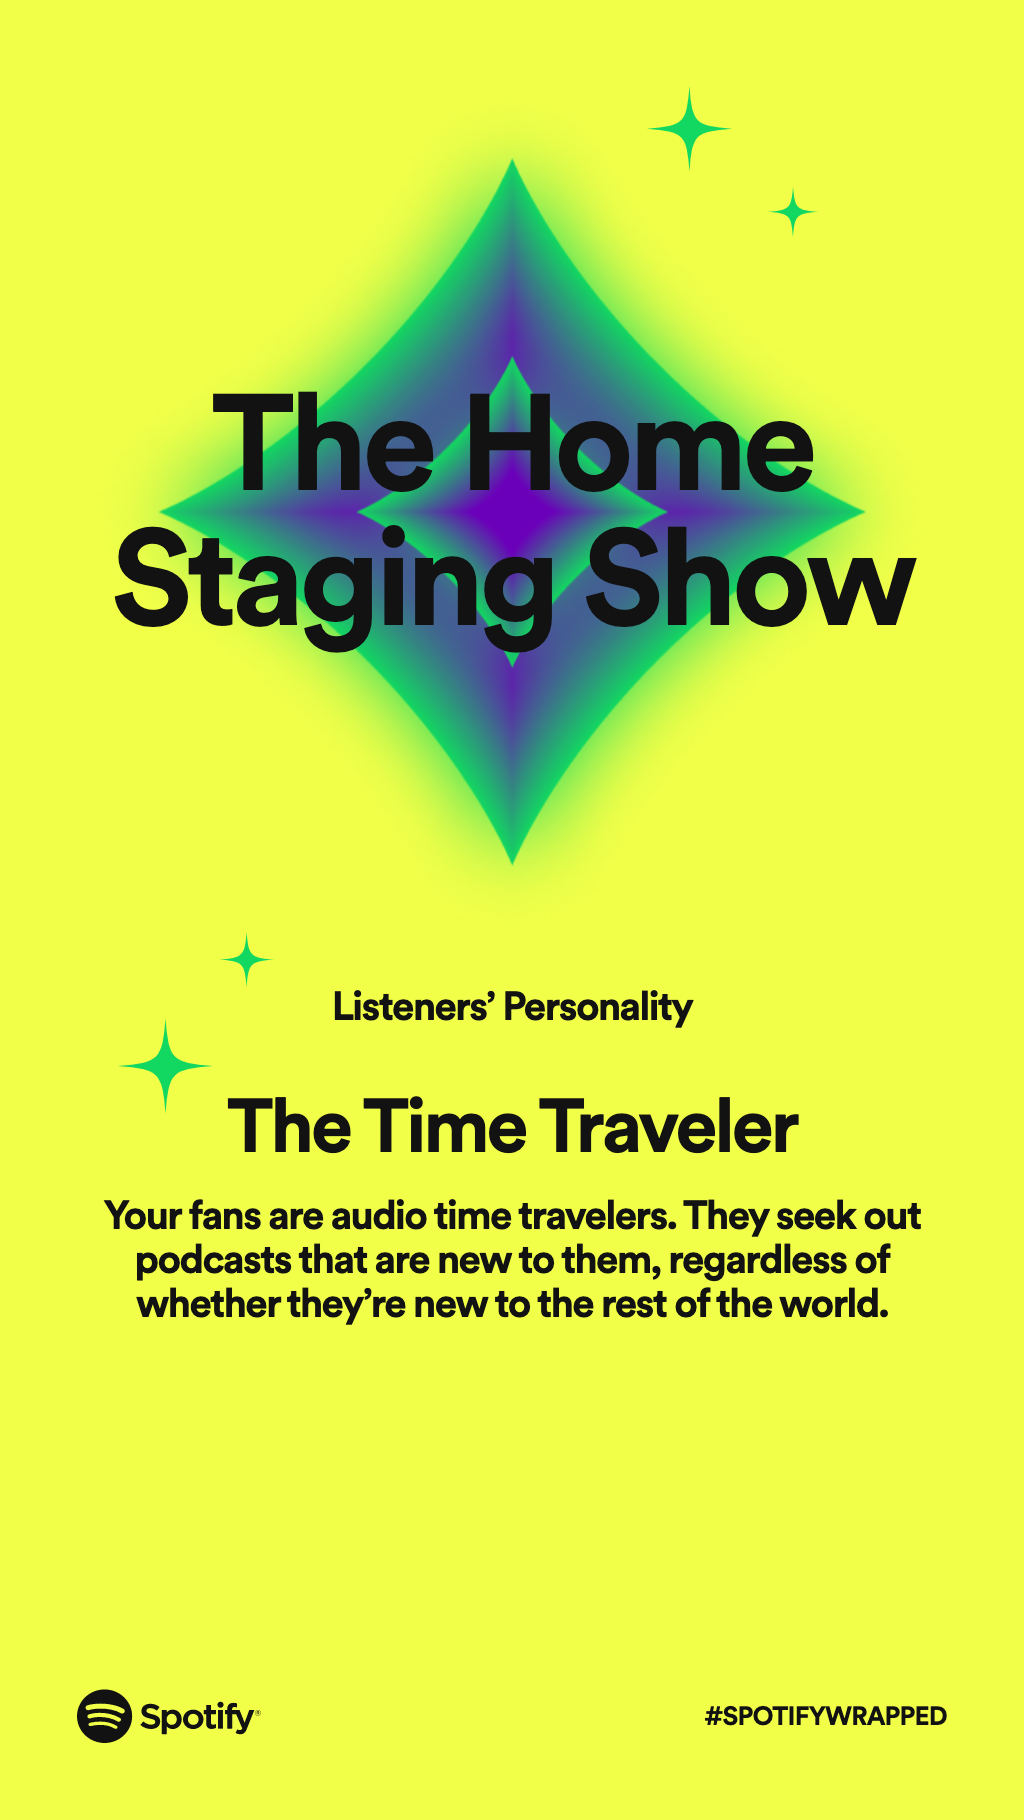 The Home Staging Show Podcast on Spotify 14.png